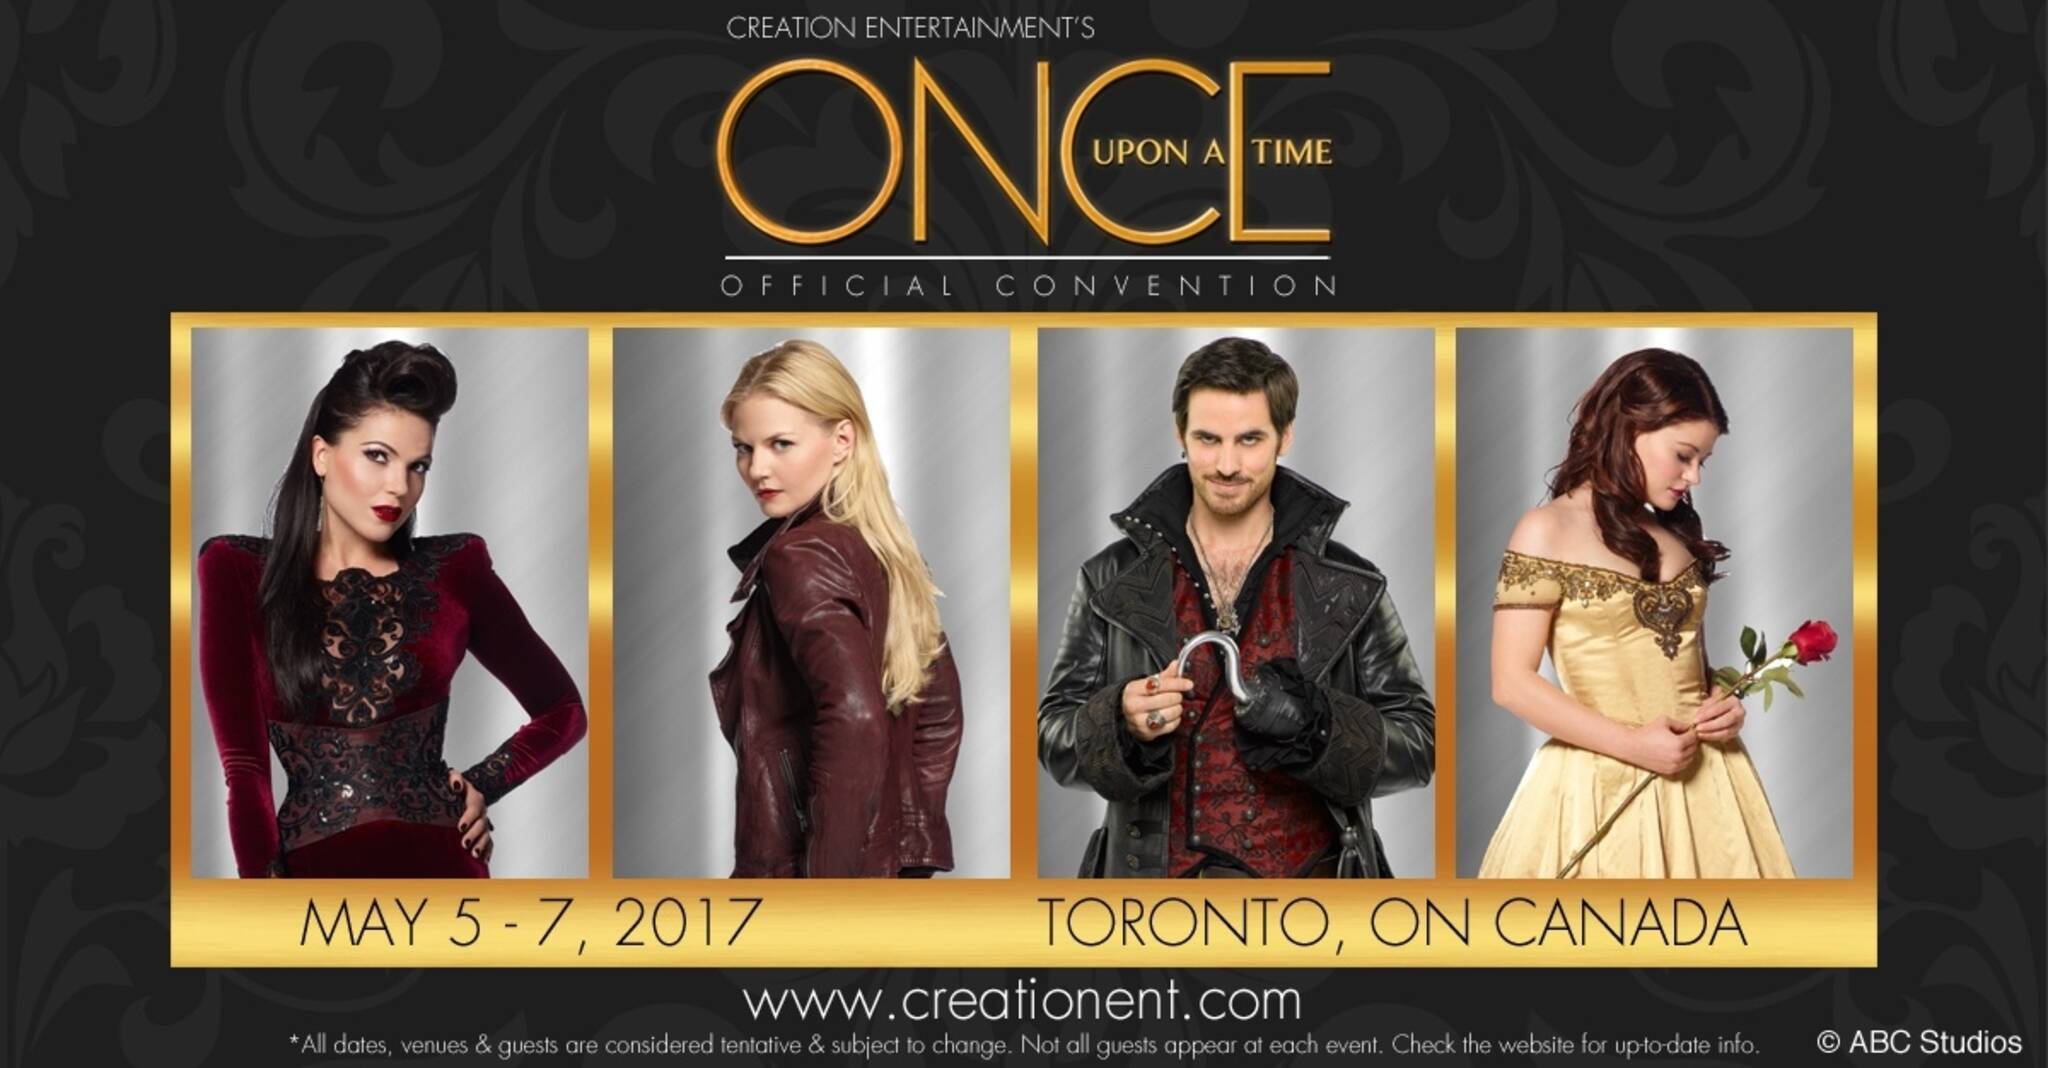 The Official Once Upon a Time Convention